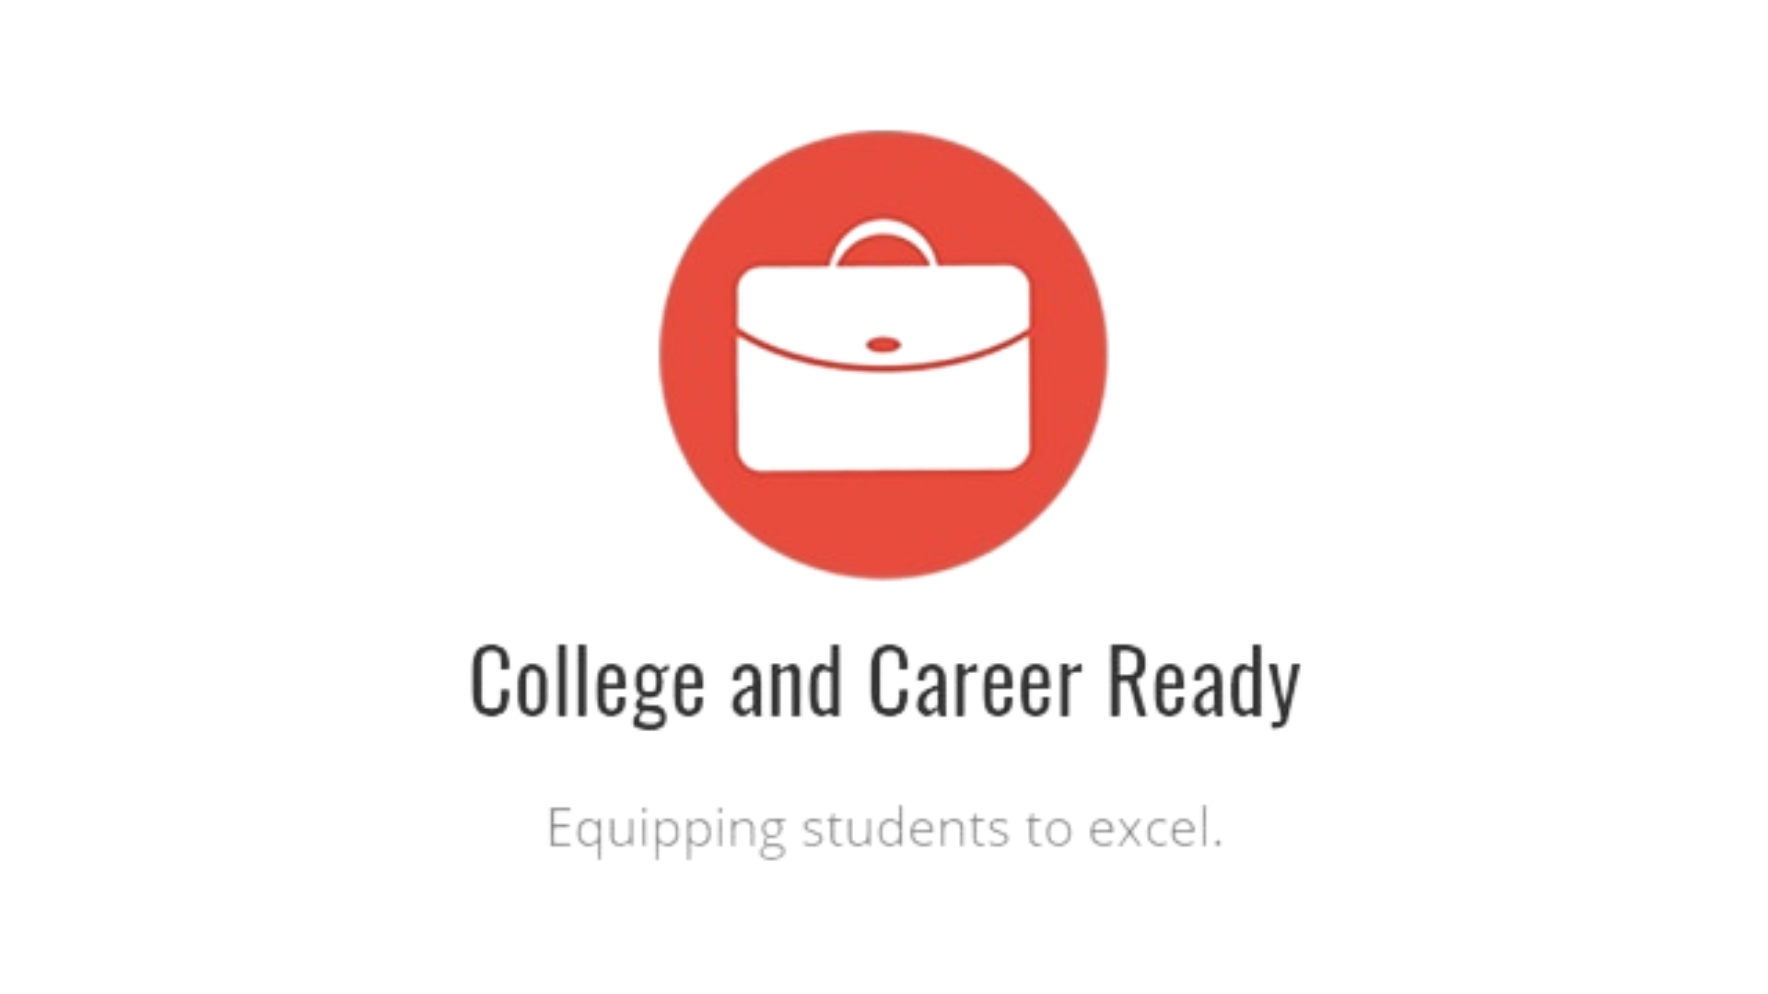 College and Career Ready Equipping students to excel.